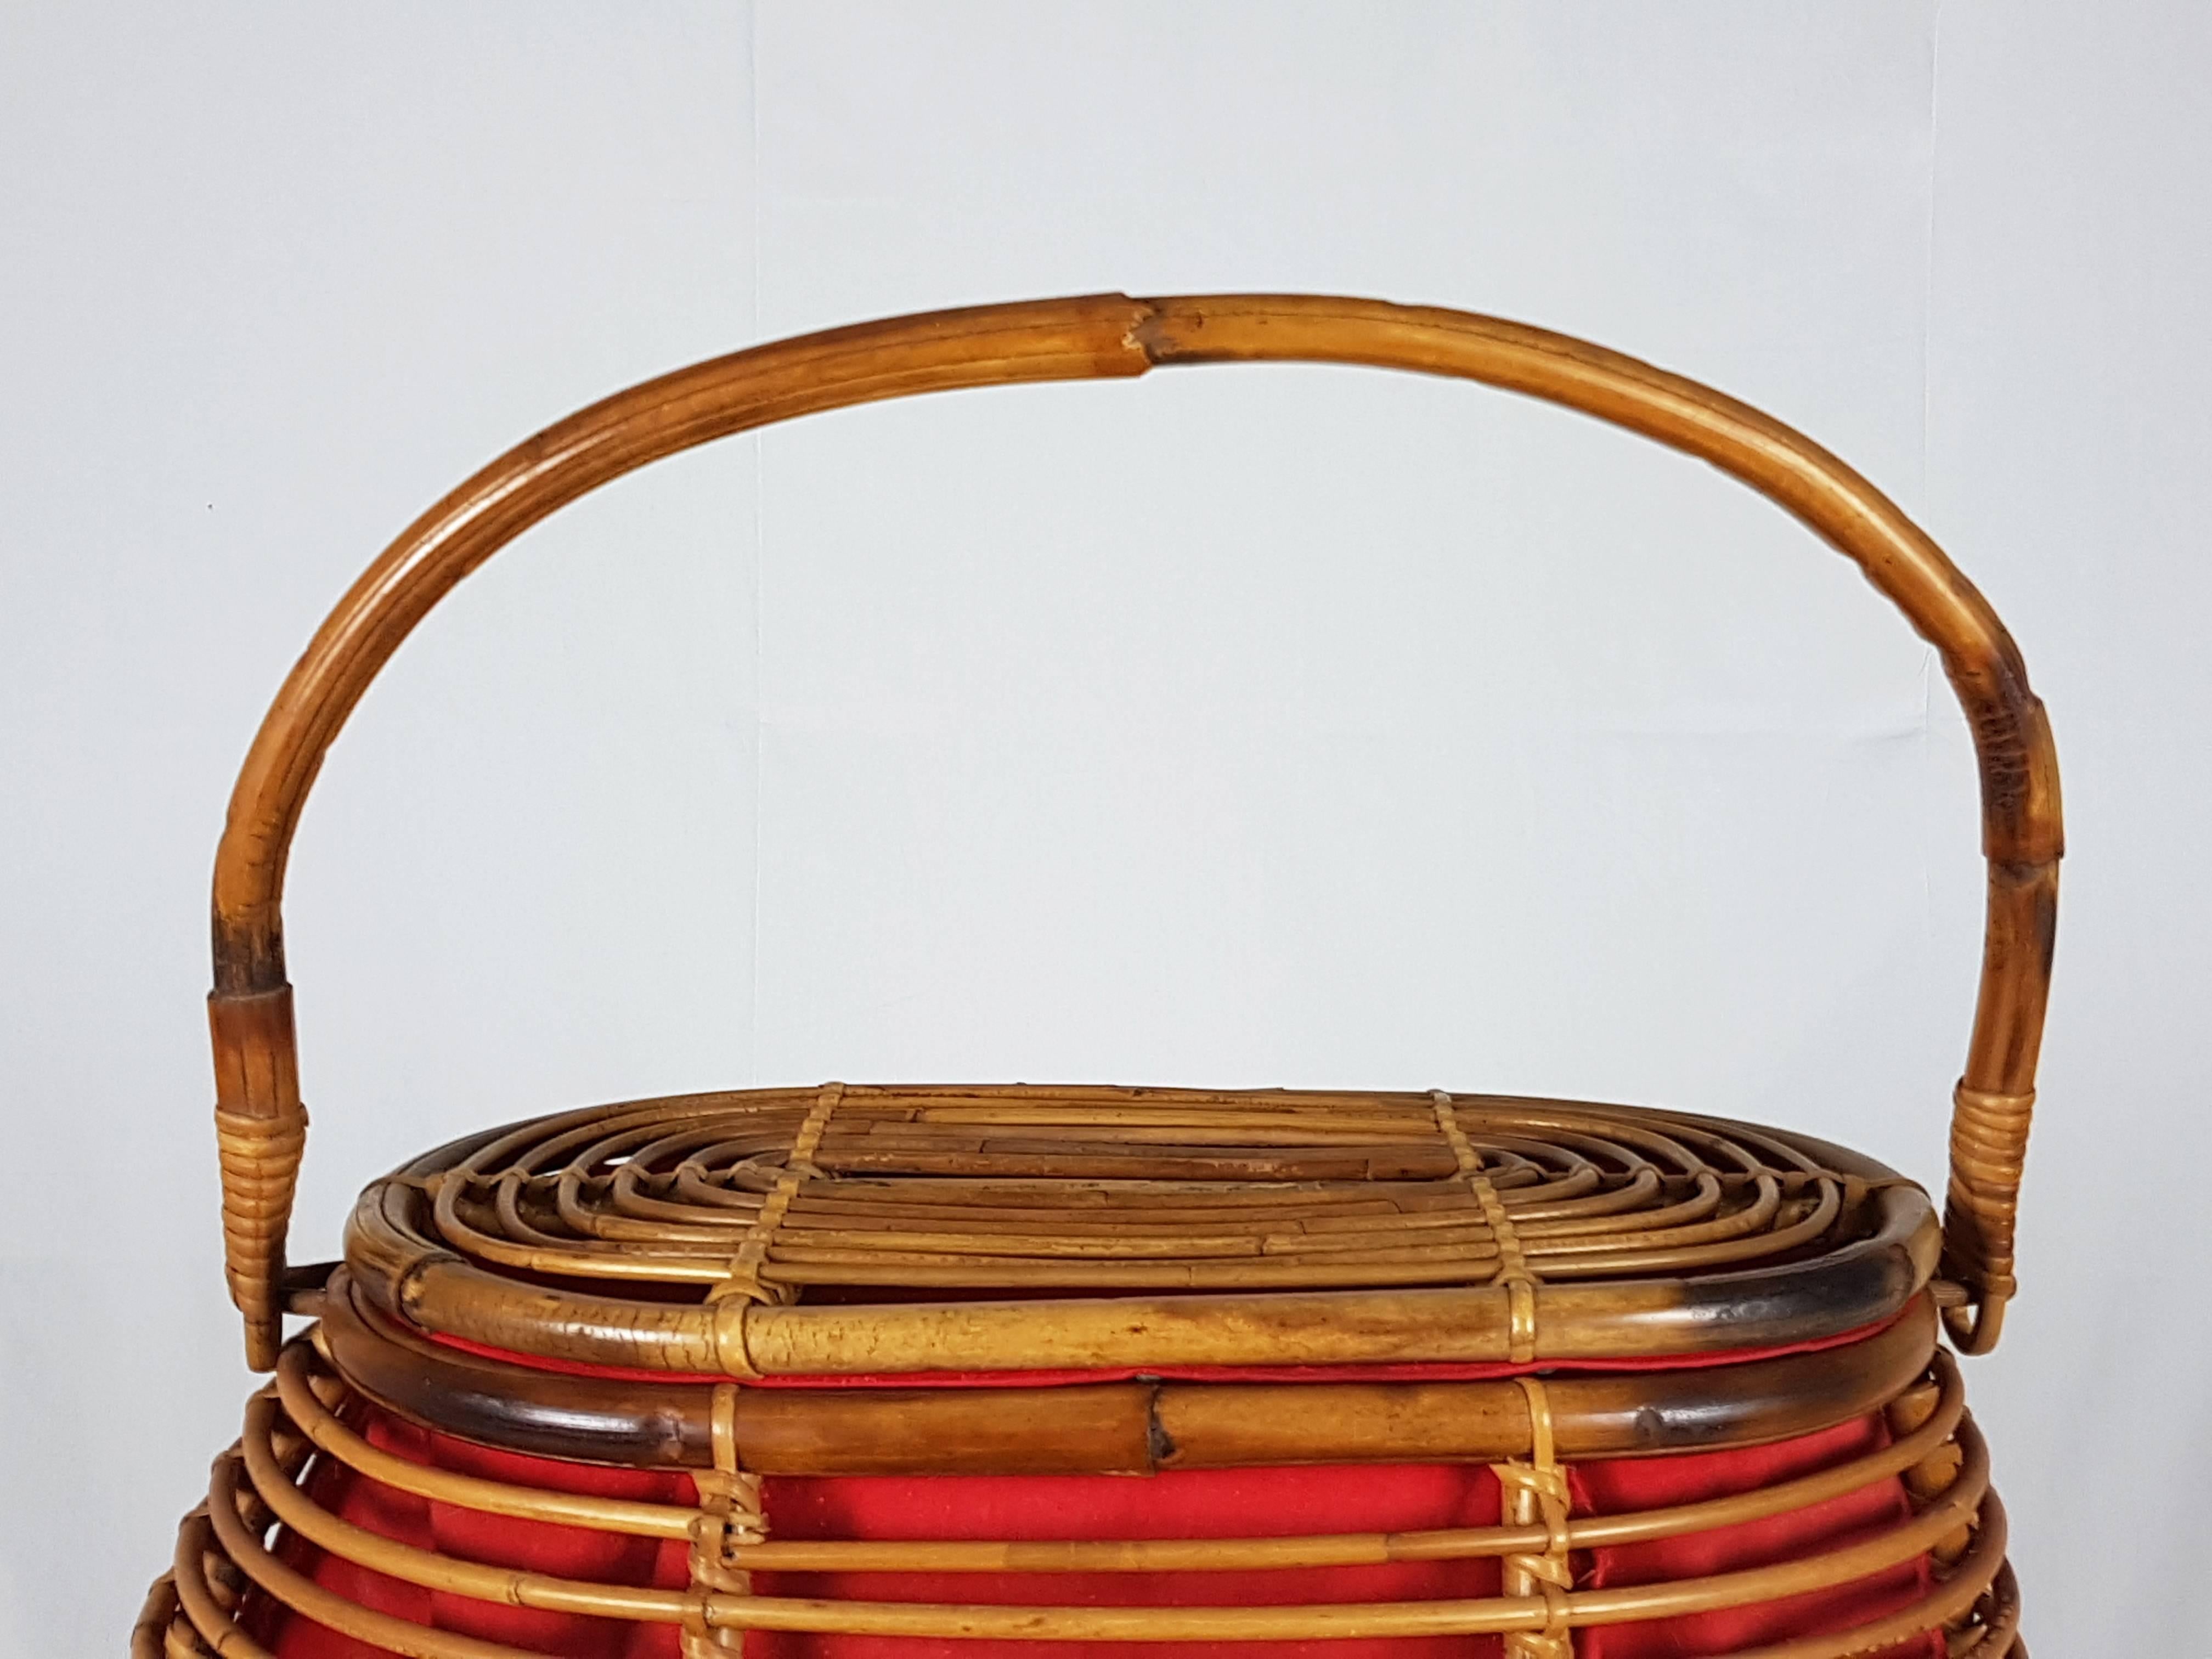 Vintage Italian Rattan 1960s Glove Box/Magazine Rack with Red Fabric For Sale 4